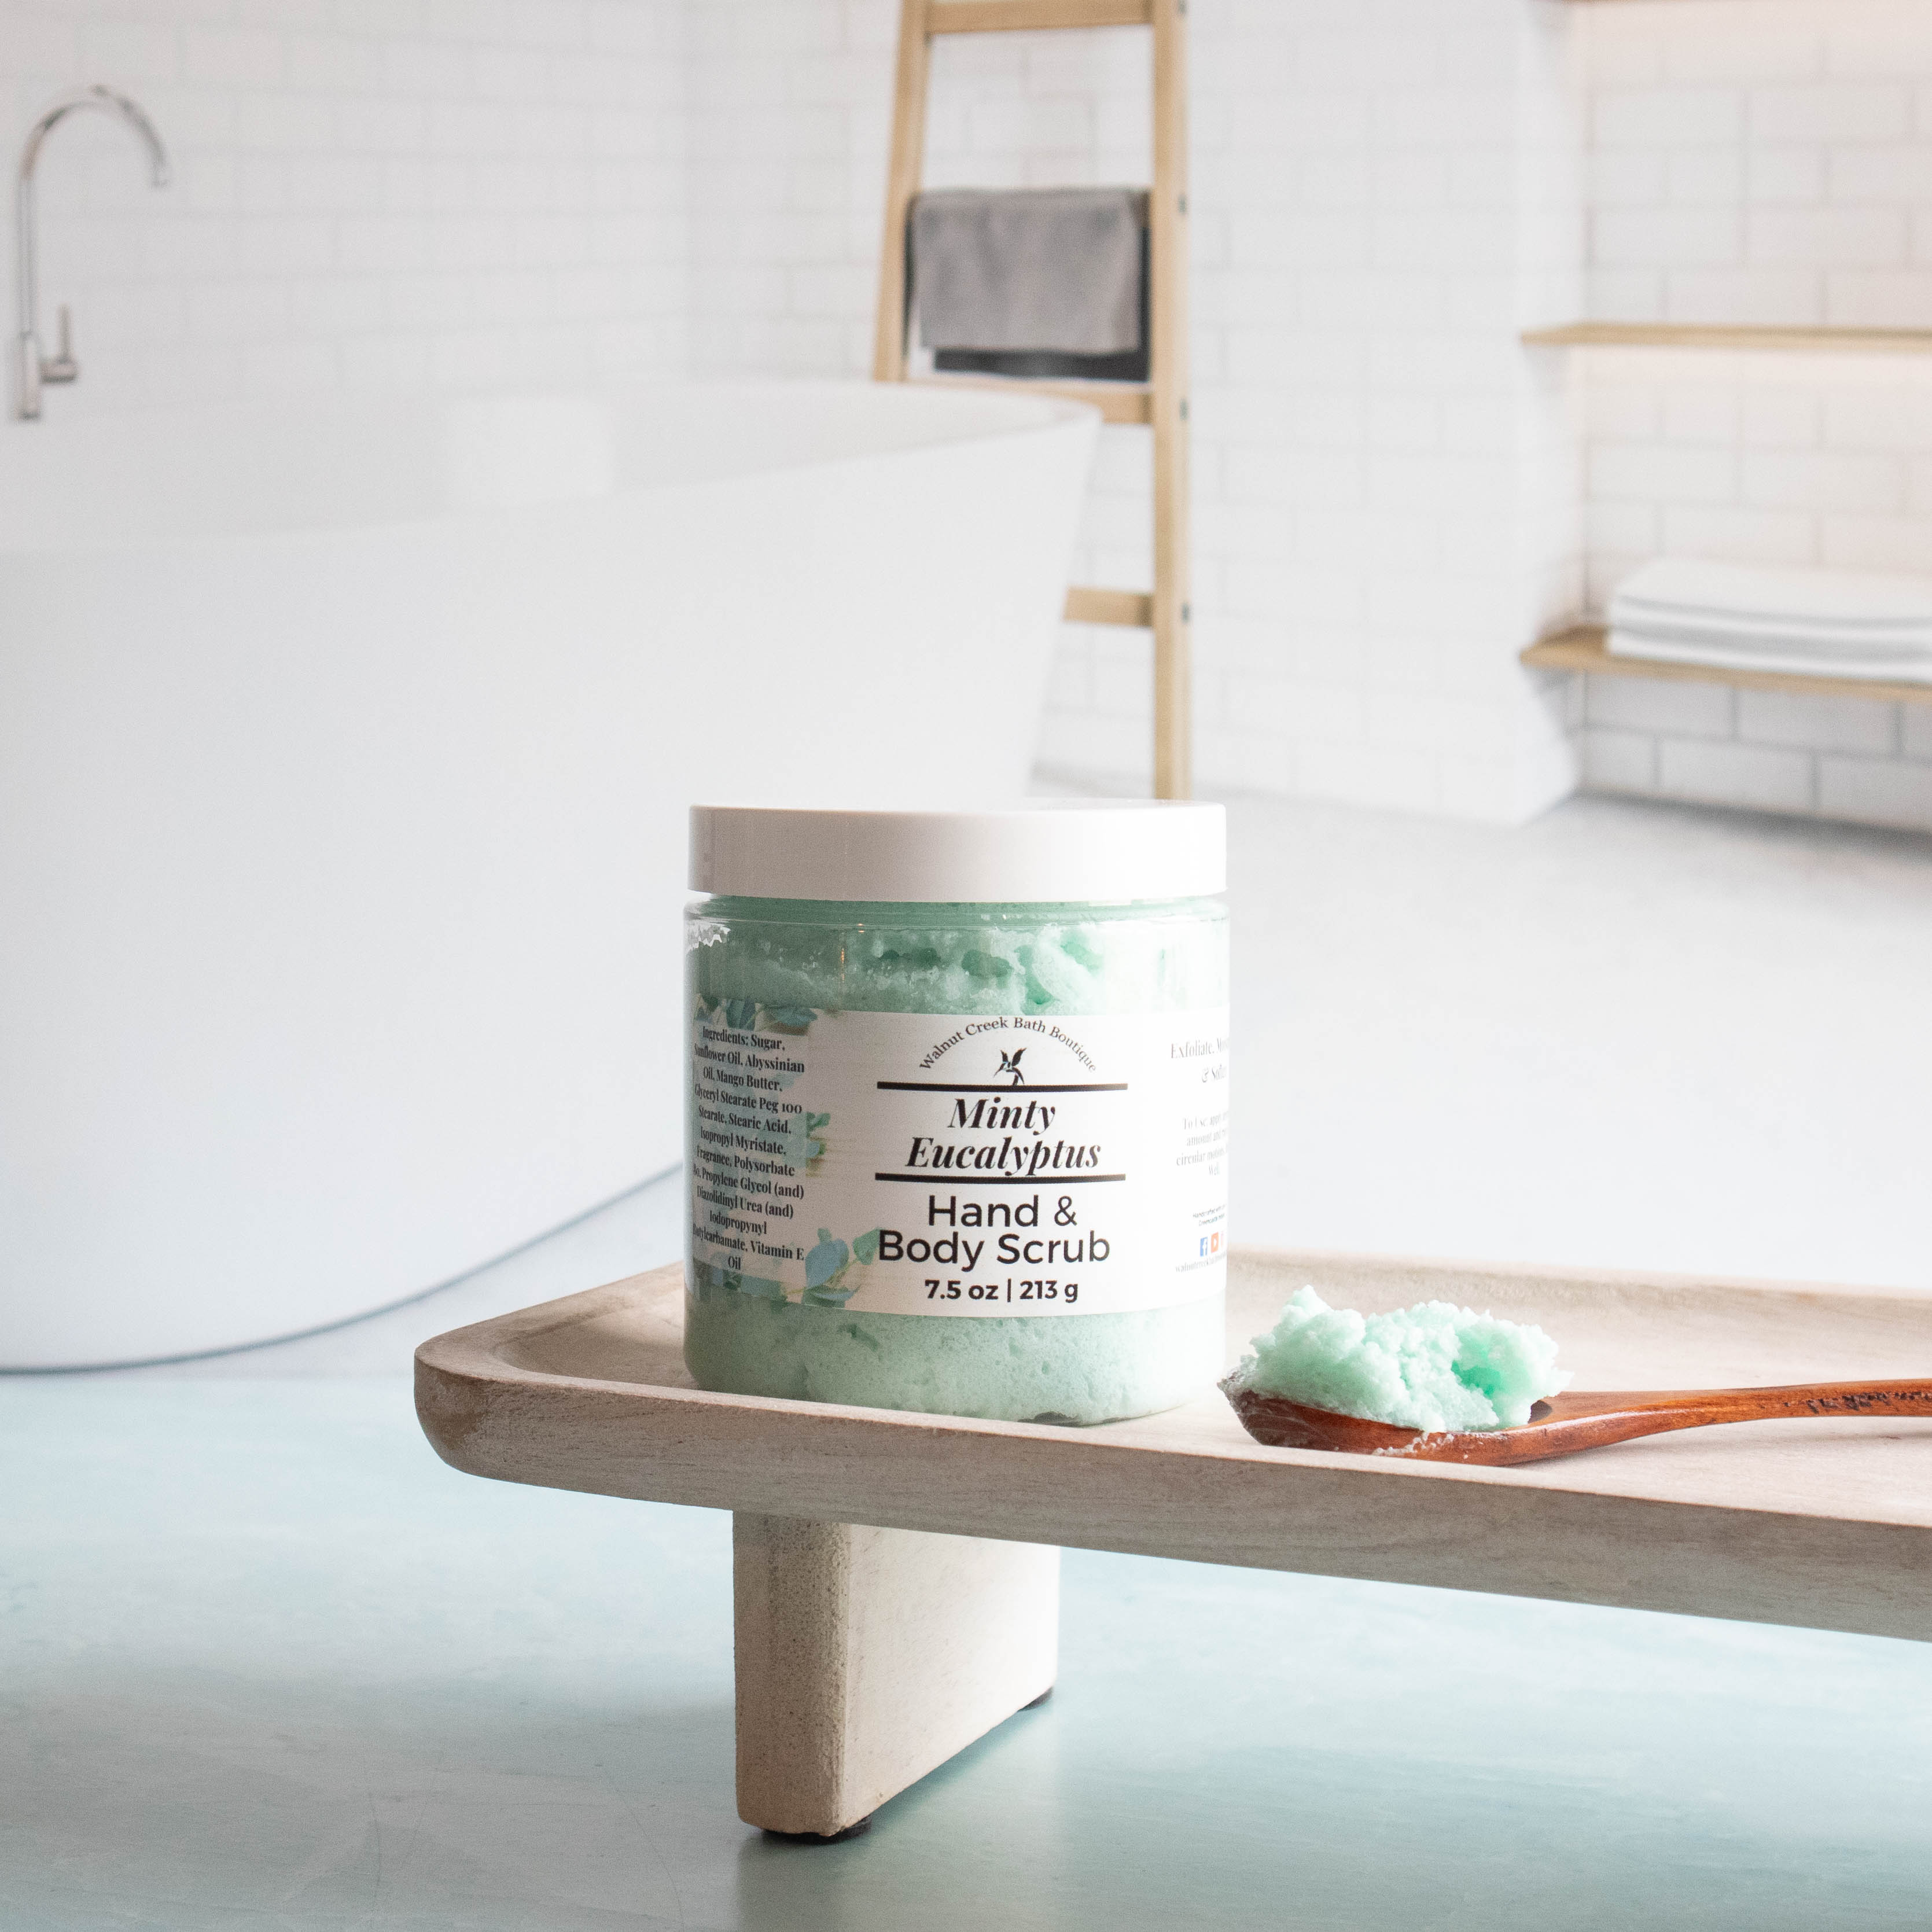 minty eucalyptus scrub is sitting on a tray. there is a wooden spoon filled with some scrub laying on the try next to the jar. this shows the pretty minty green scrub color. there is a tub in the background with a ladder with a towel draped over one of the rungs.